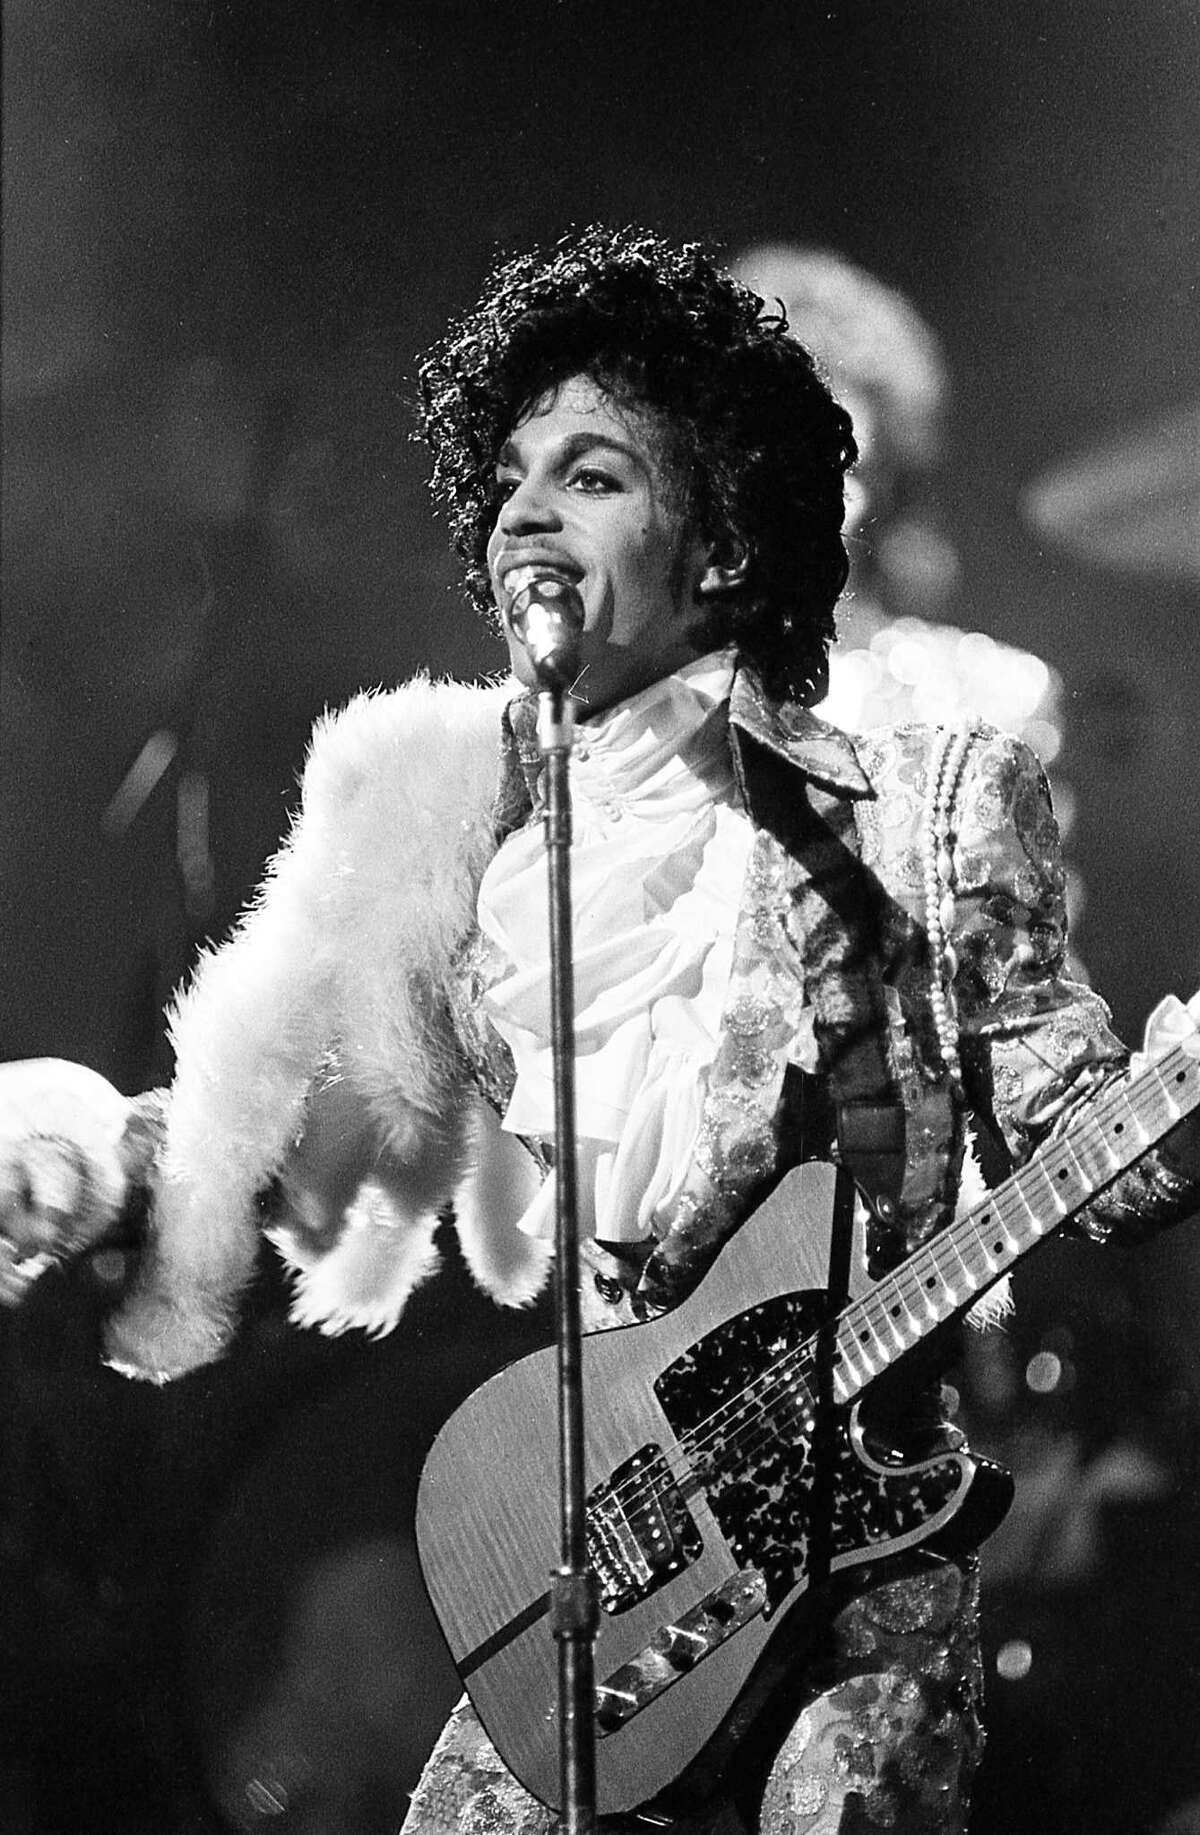 Prince performs at the Summit, Jan. 10, 1985.